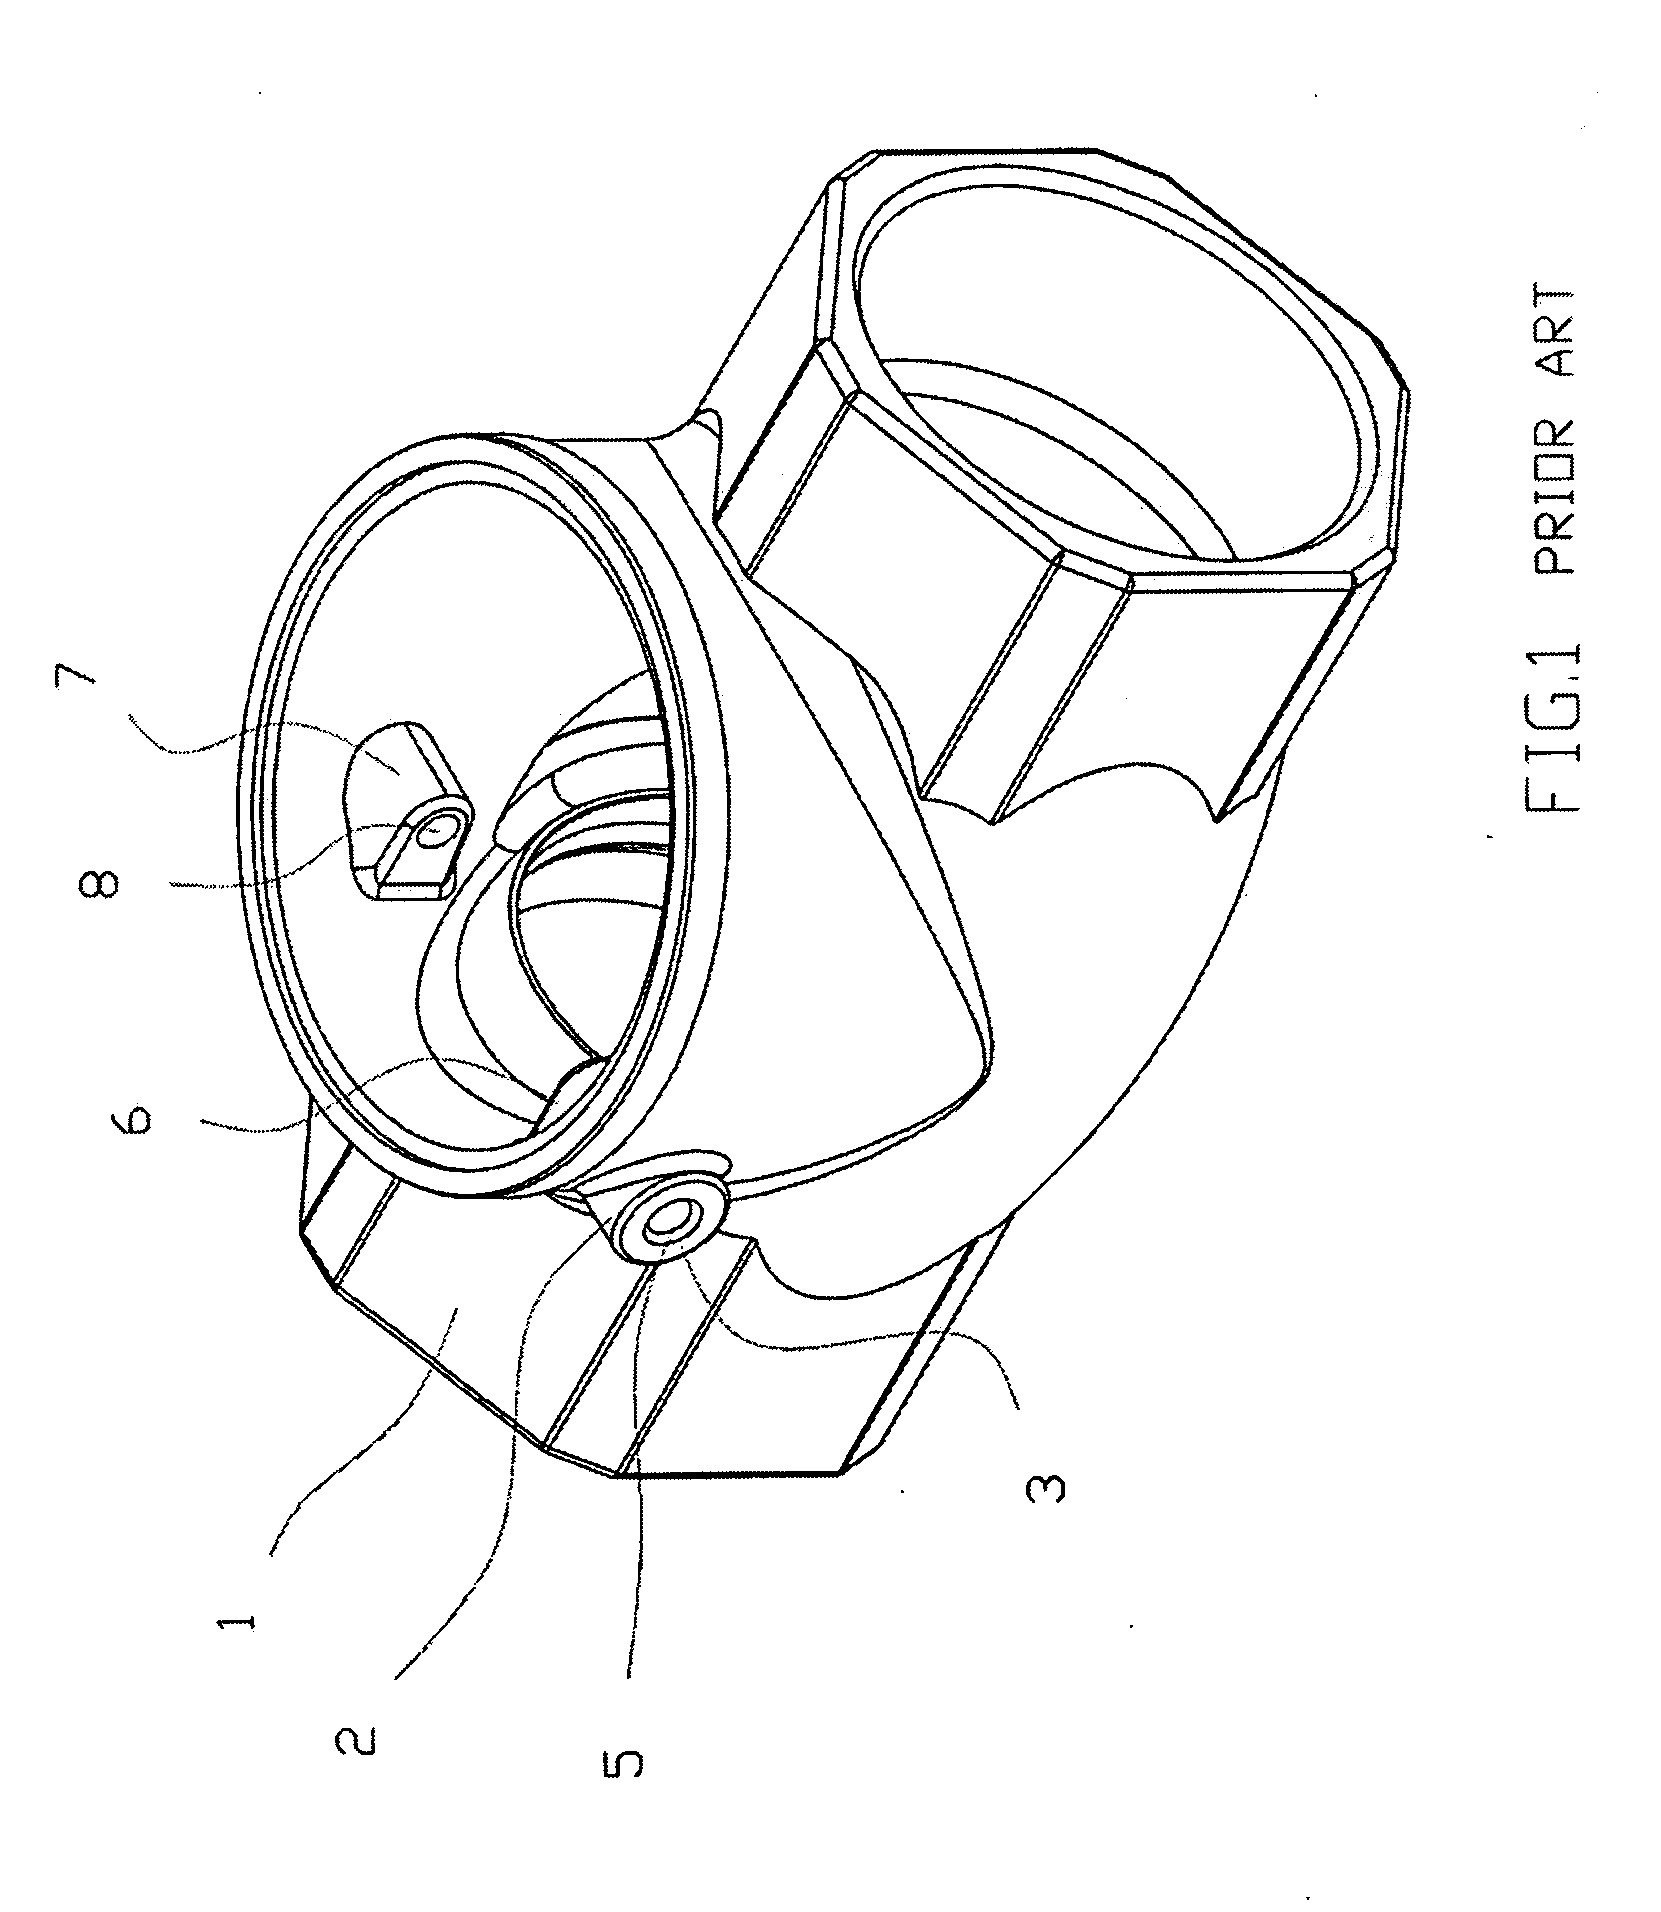 Connecting structure for a check valve